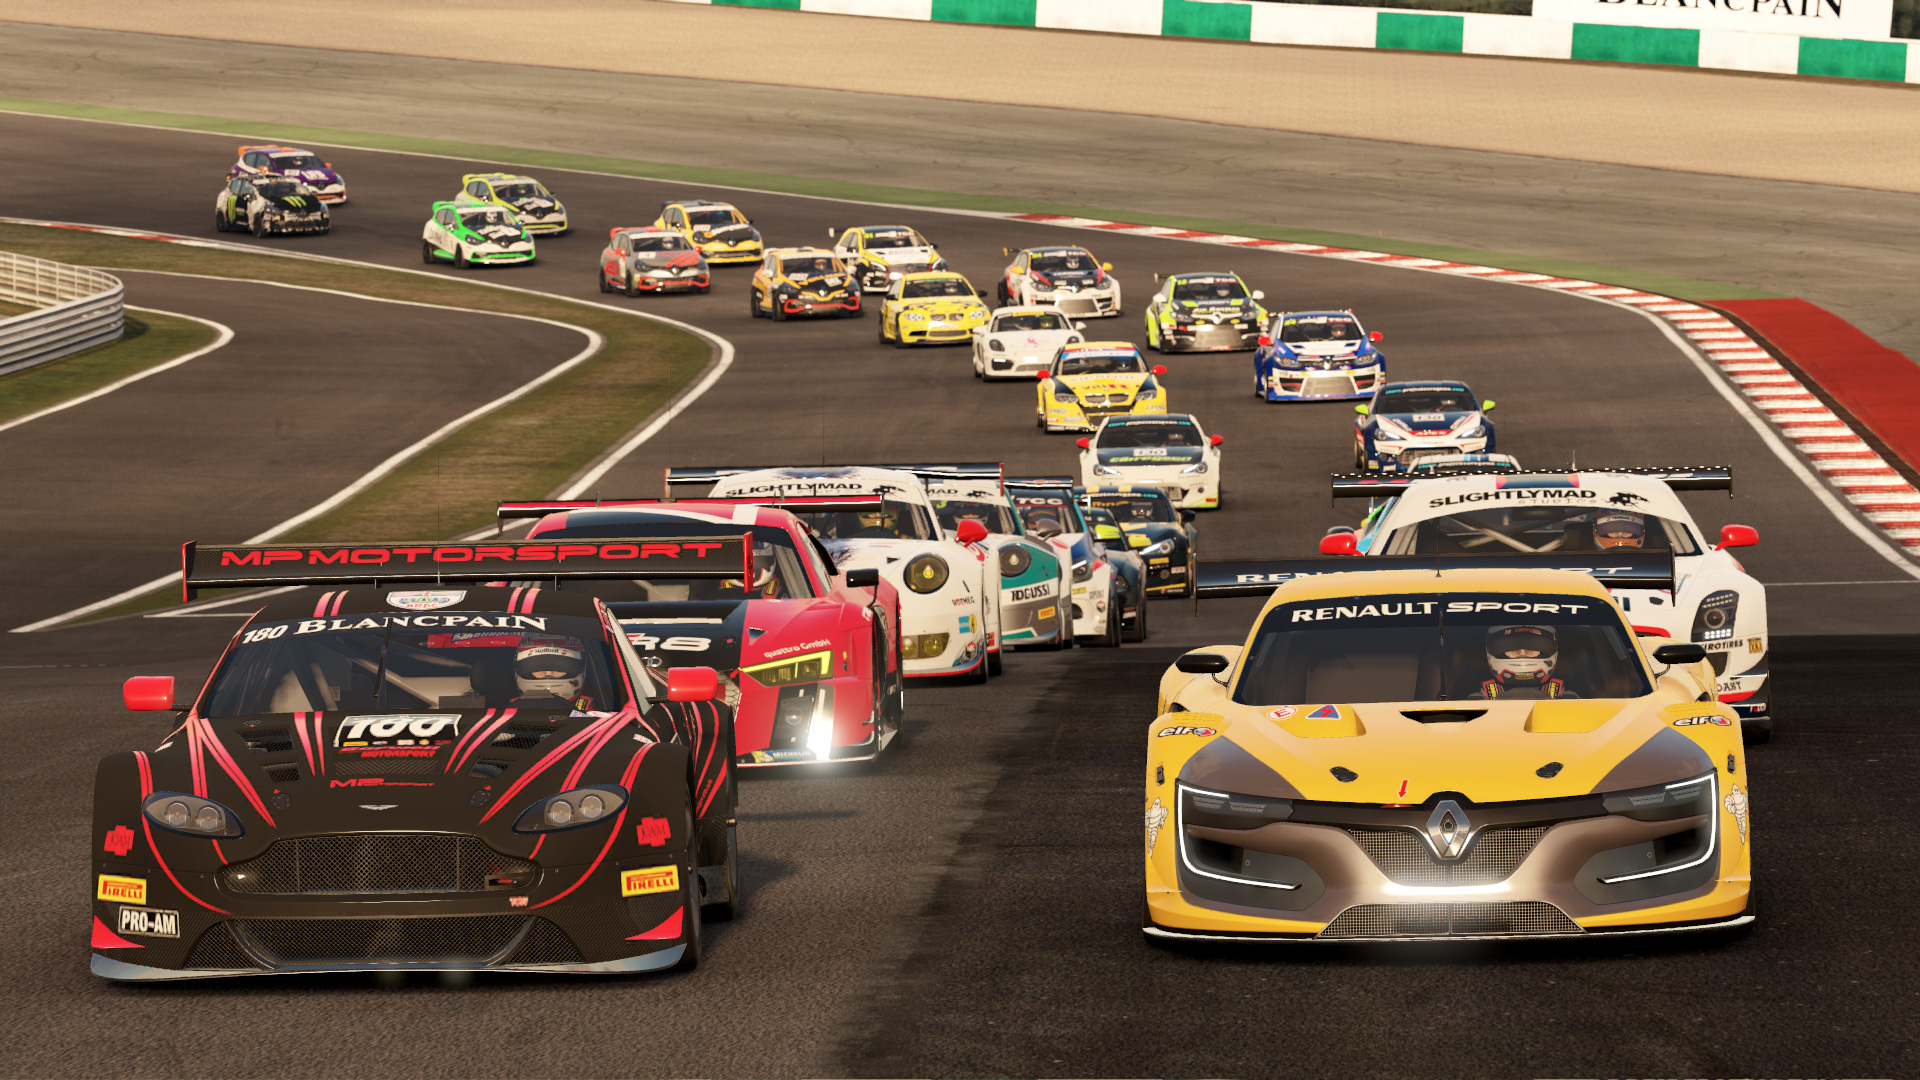 EA cancels the Project Cars series